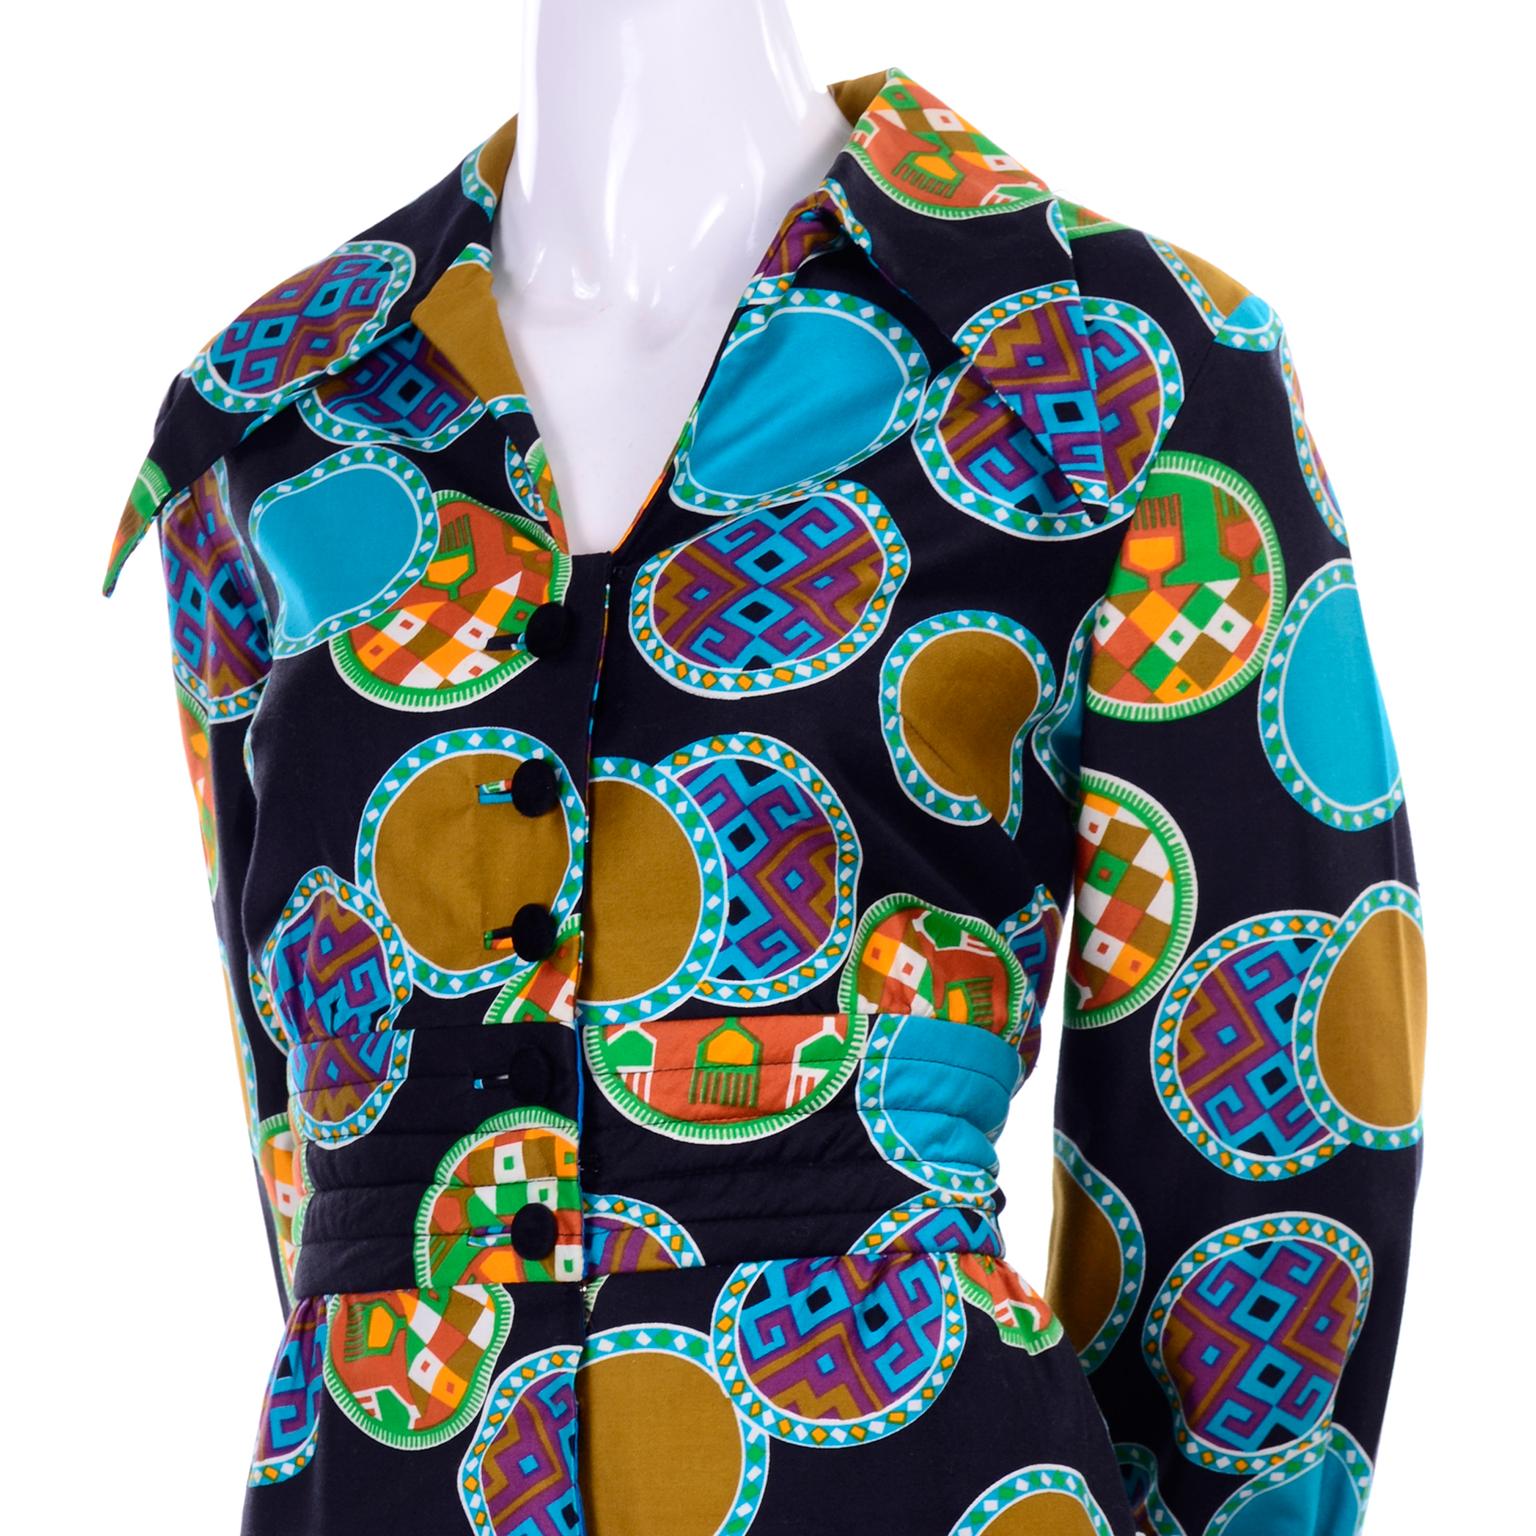 Black Dynasty Vintage Maxi Dress in Colorful Medallion Print With Pockets